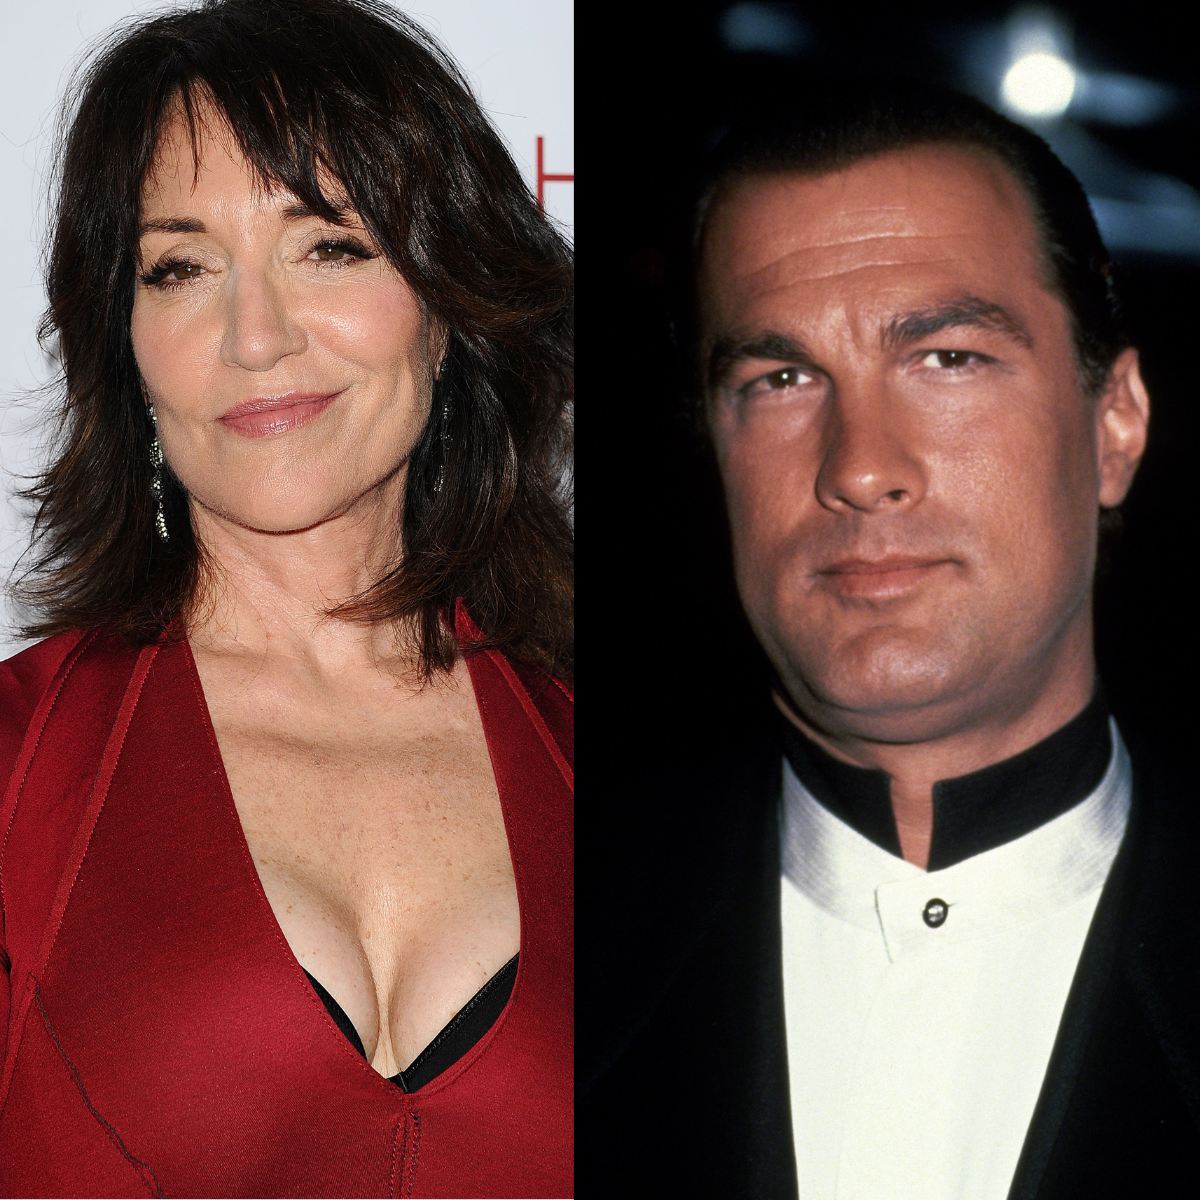 Is Katey Sagal related to Steven Seagal